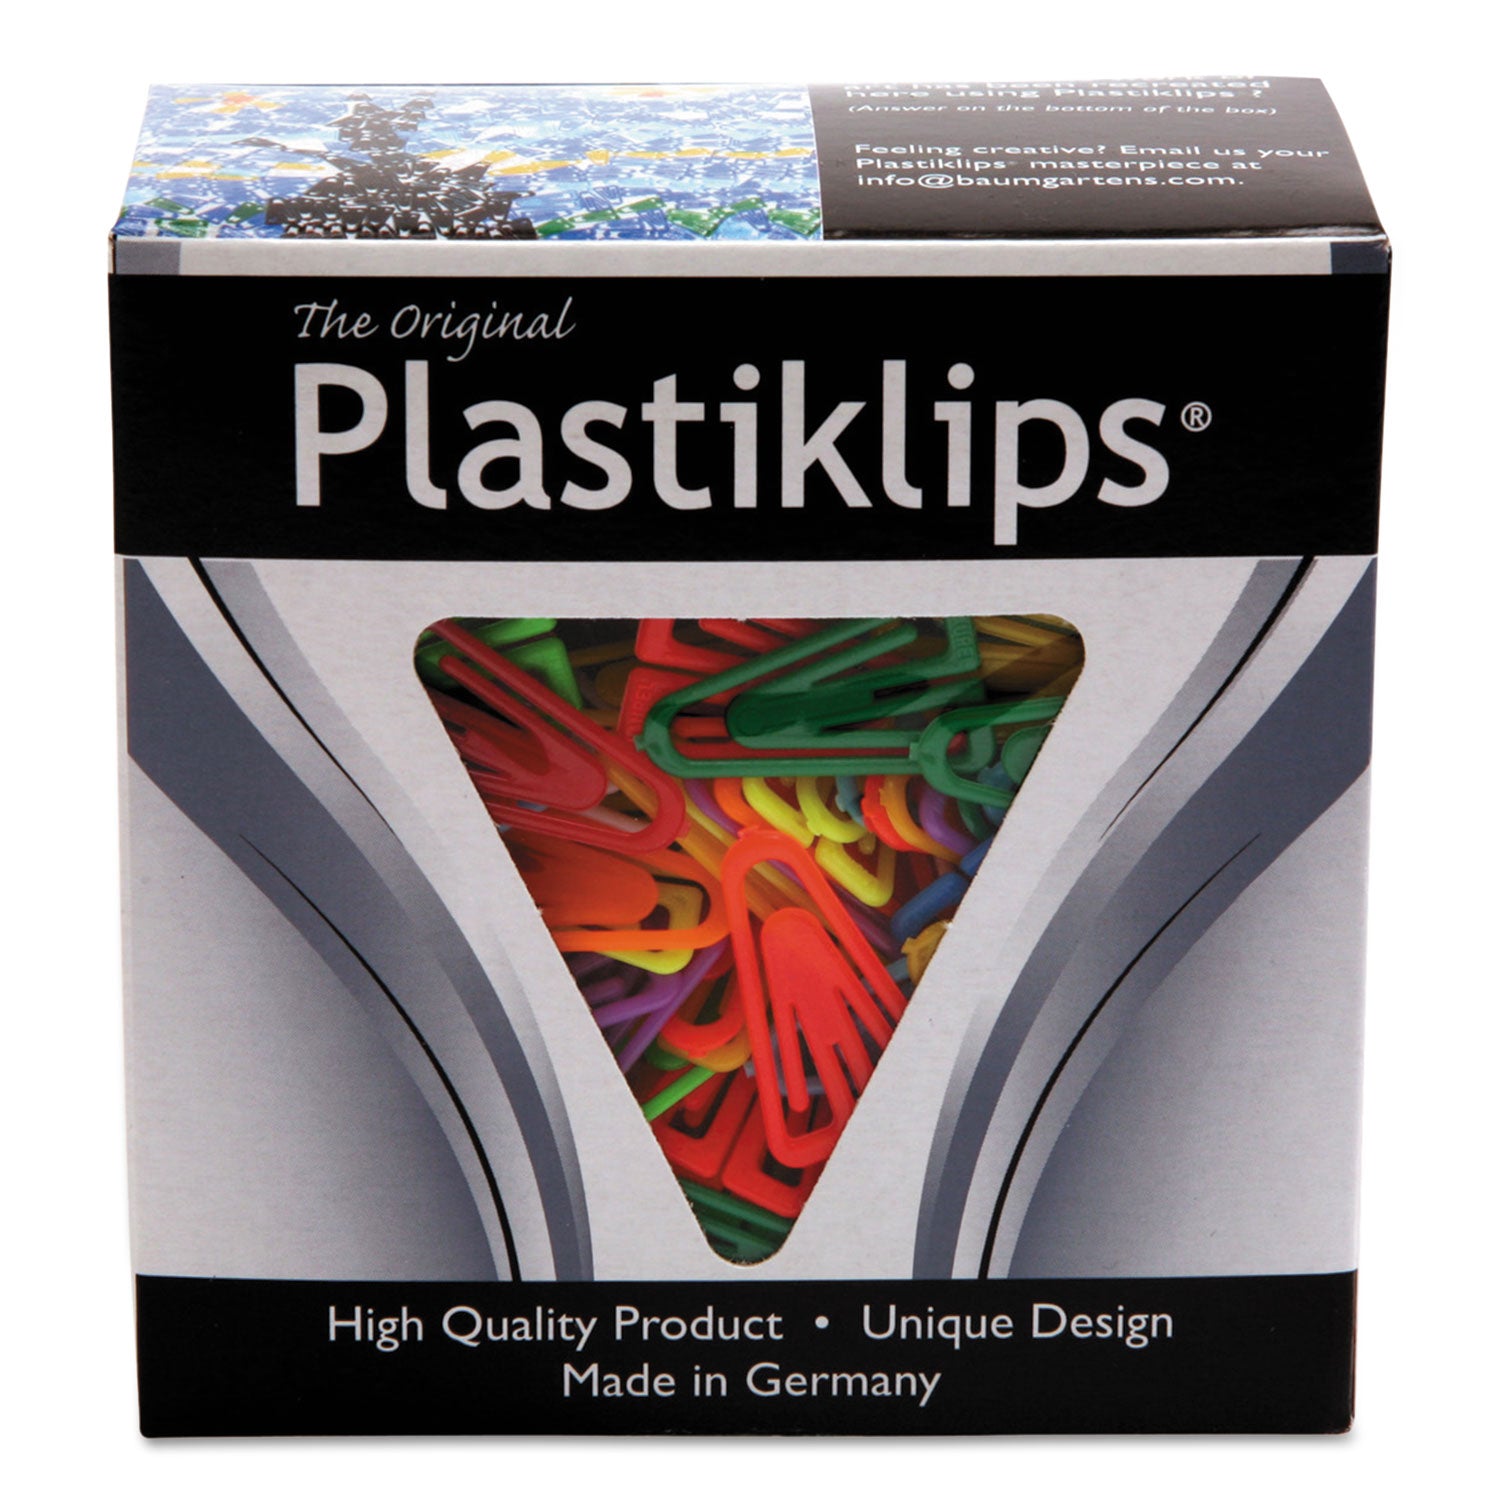 Plastiklips Paper Clips, Medium, Smooth, Assorted Colors, 500/Box - 